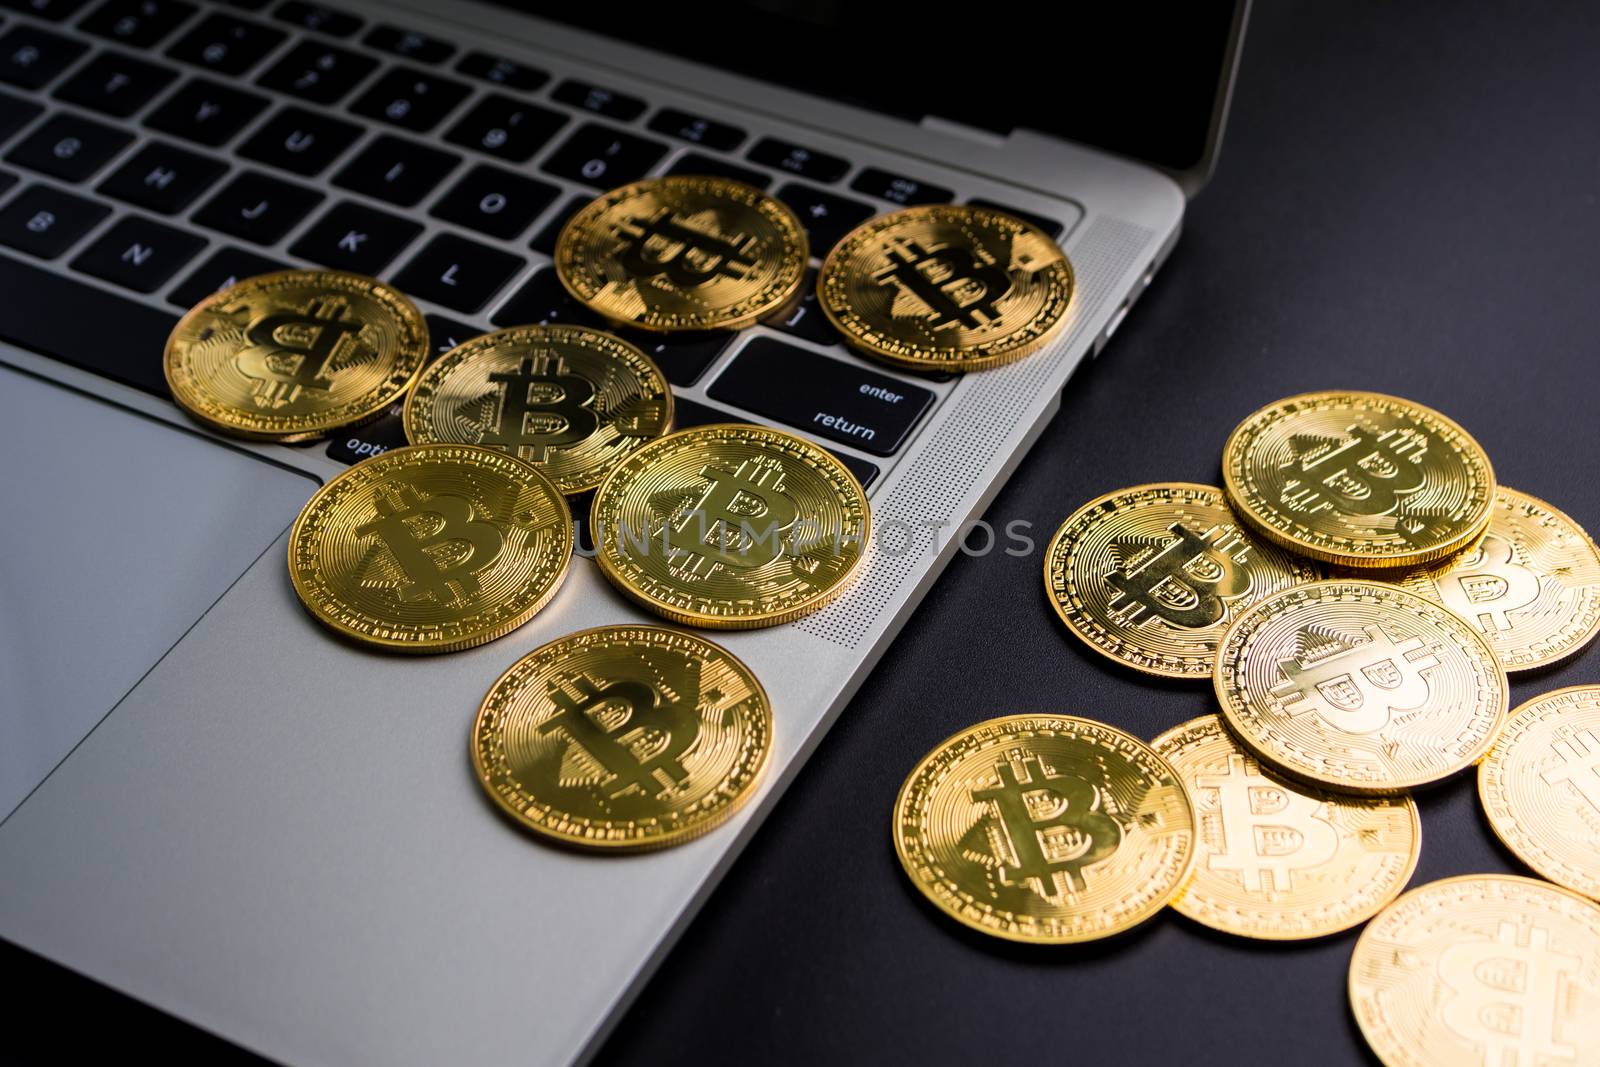 Golden coins with bitcoin symbol on computer keyboard and a black background.